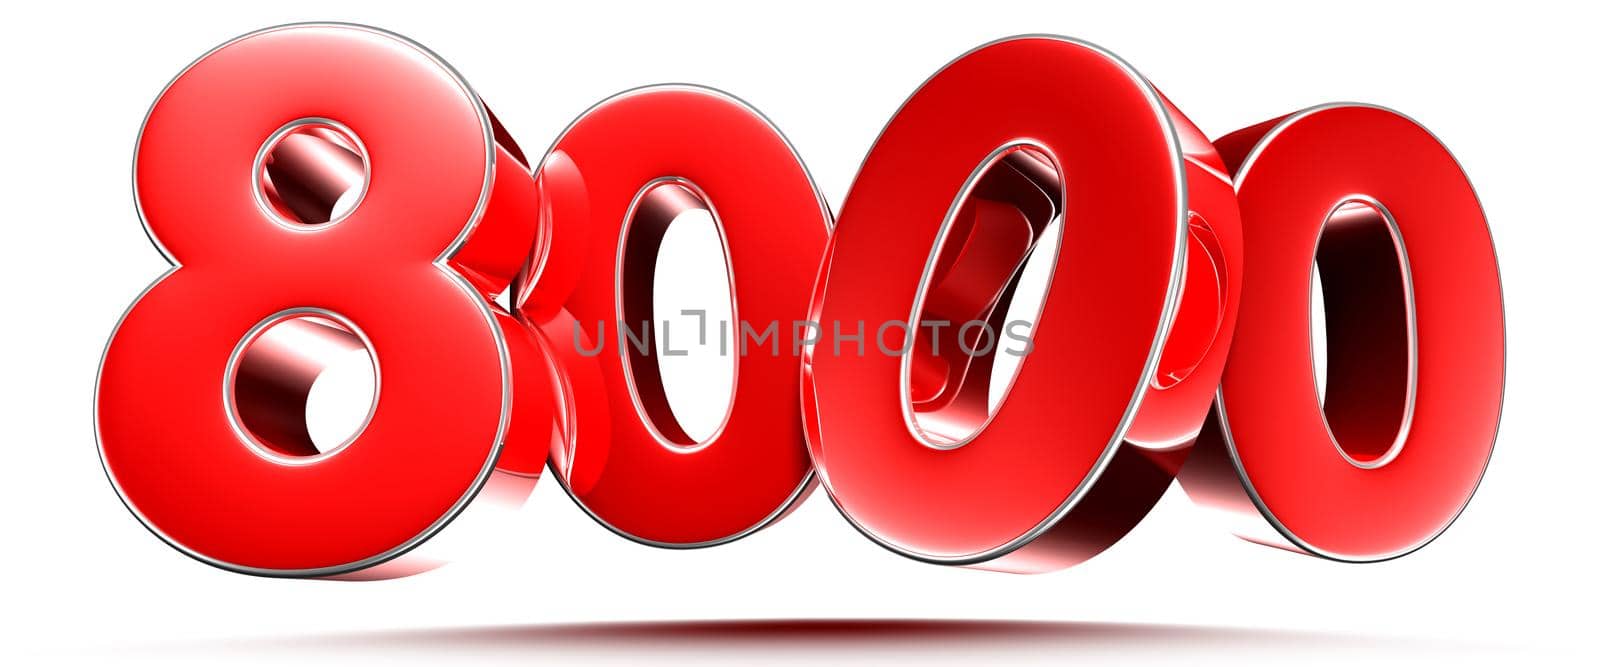 Rounded red numbers 8000 on white background 3D illustration with clipping path by thitimontoyai